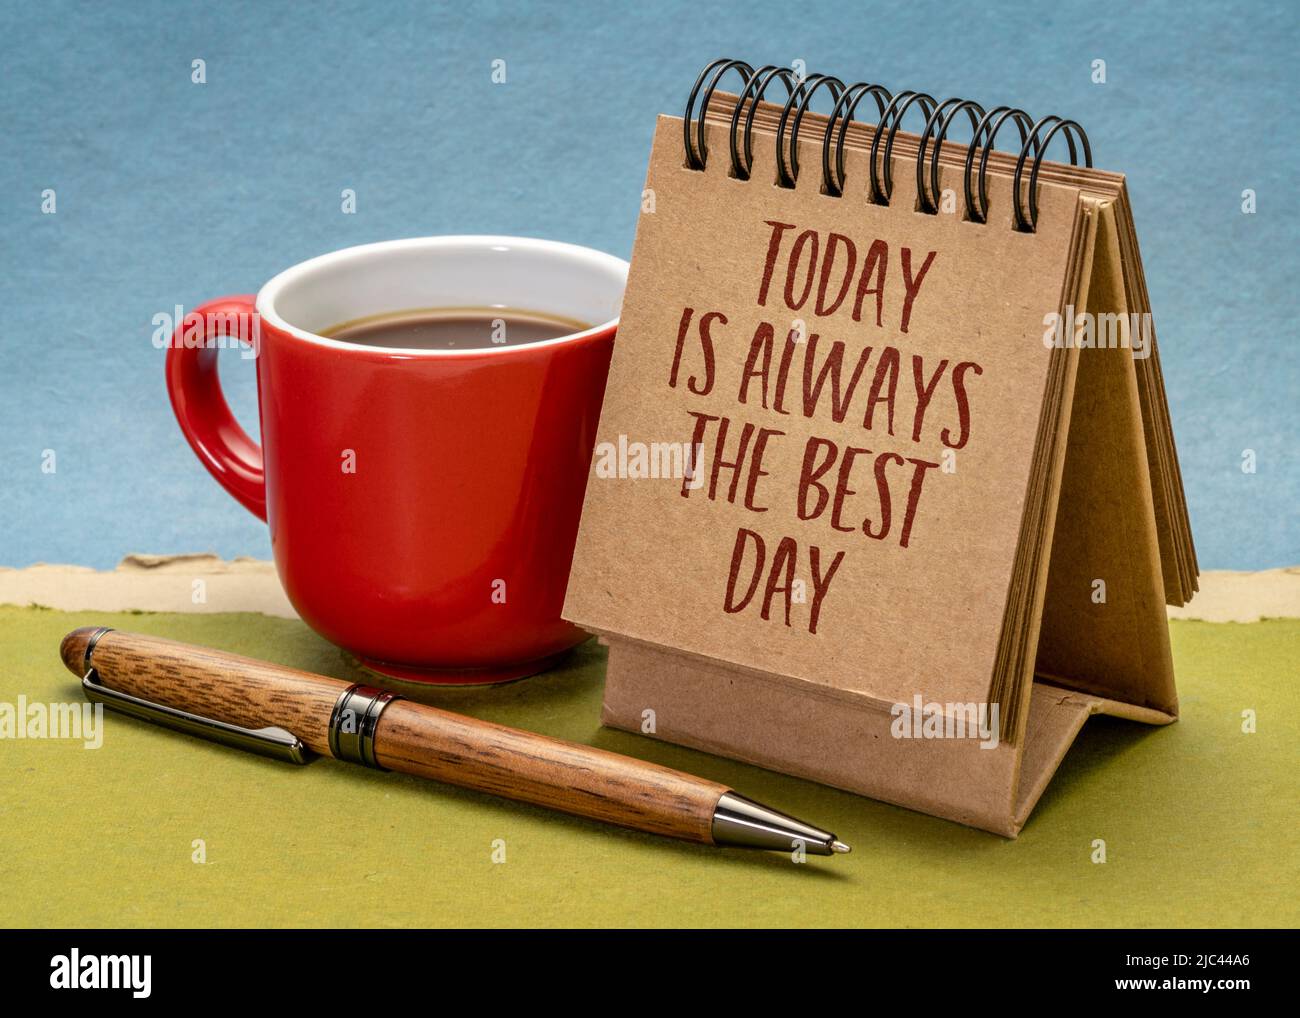 Today is always the best day - inspirational handwriting in a small desktop calendar with a cup of coffee, positive mindset and attitude concept Stock Photo